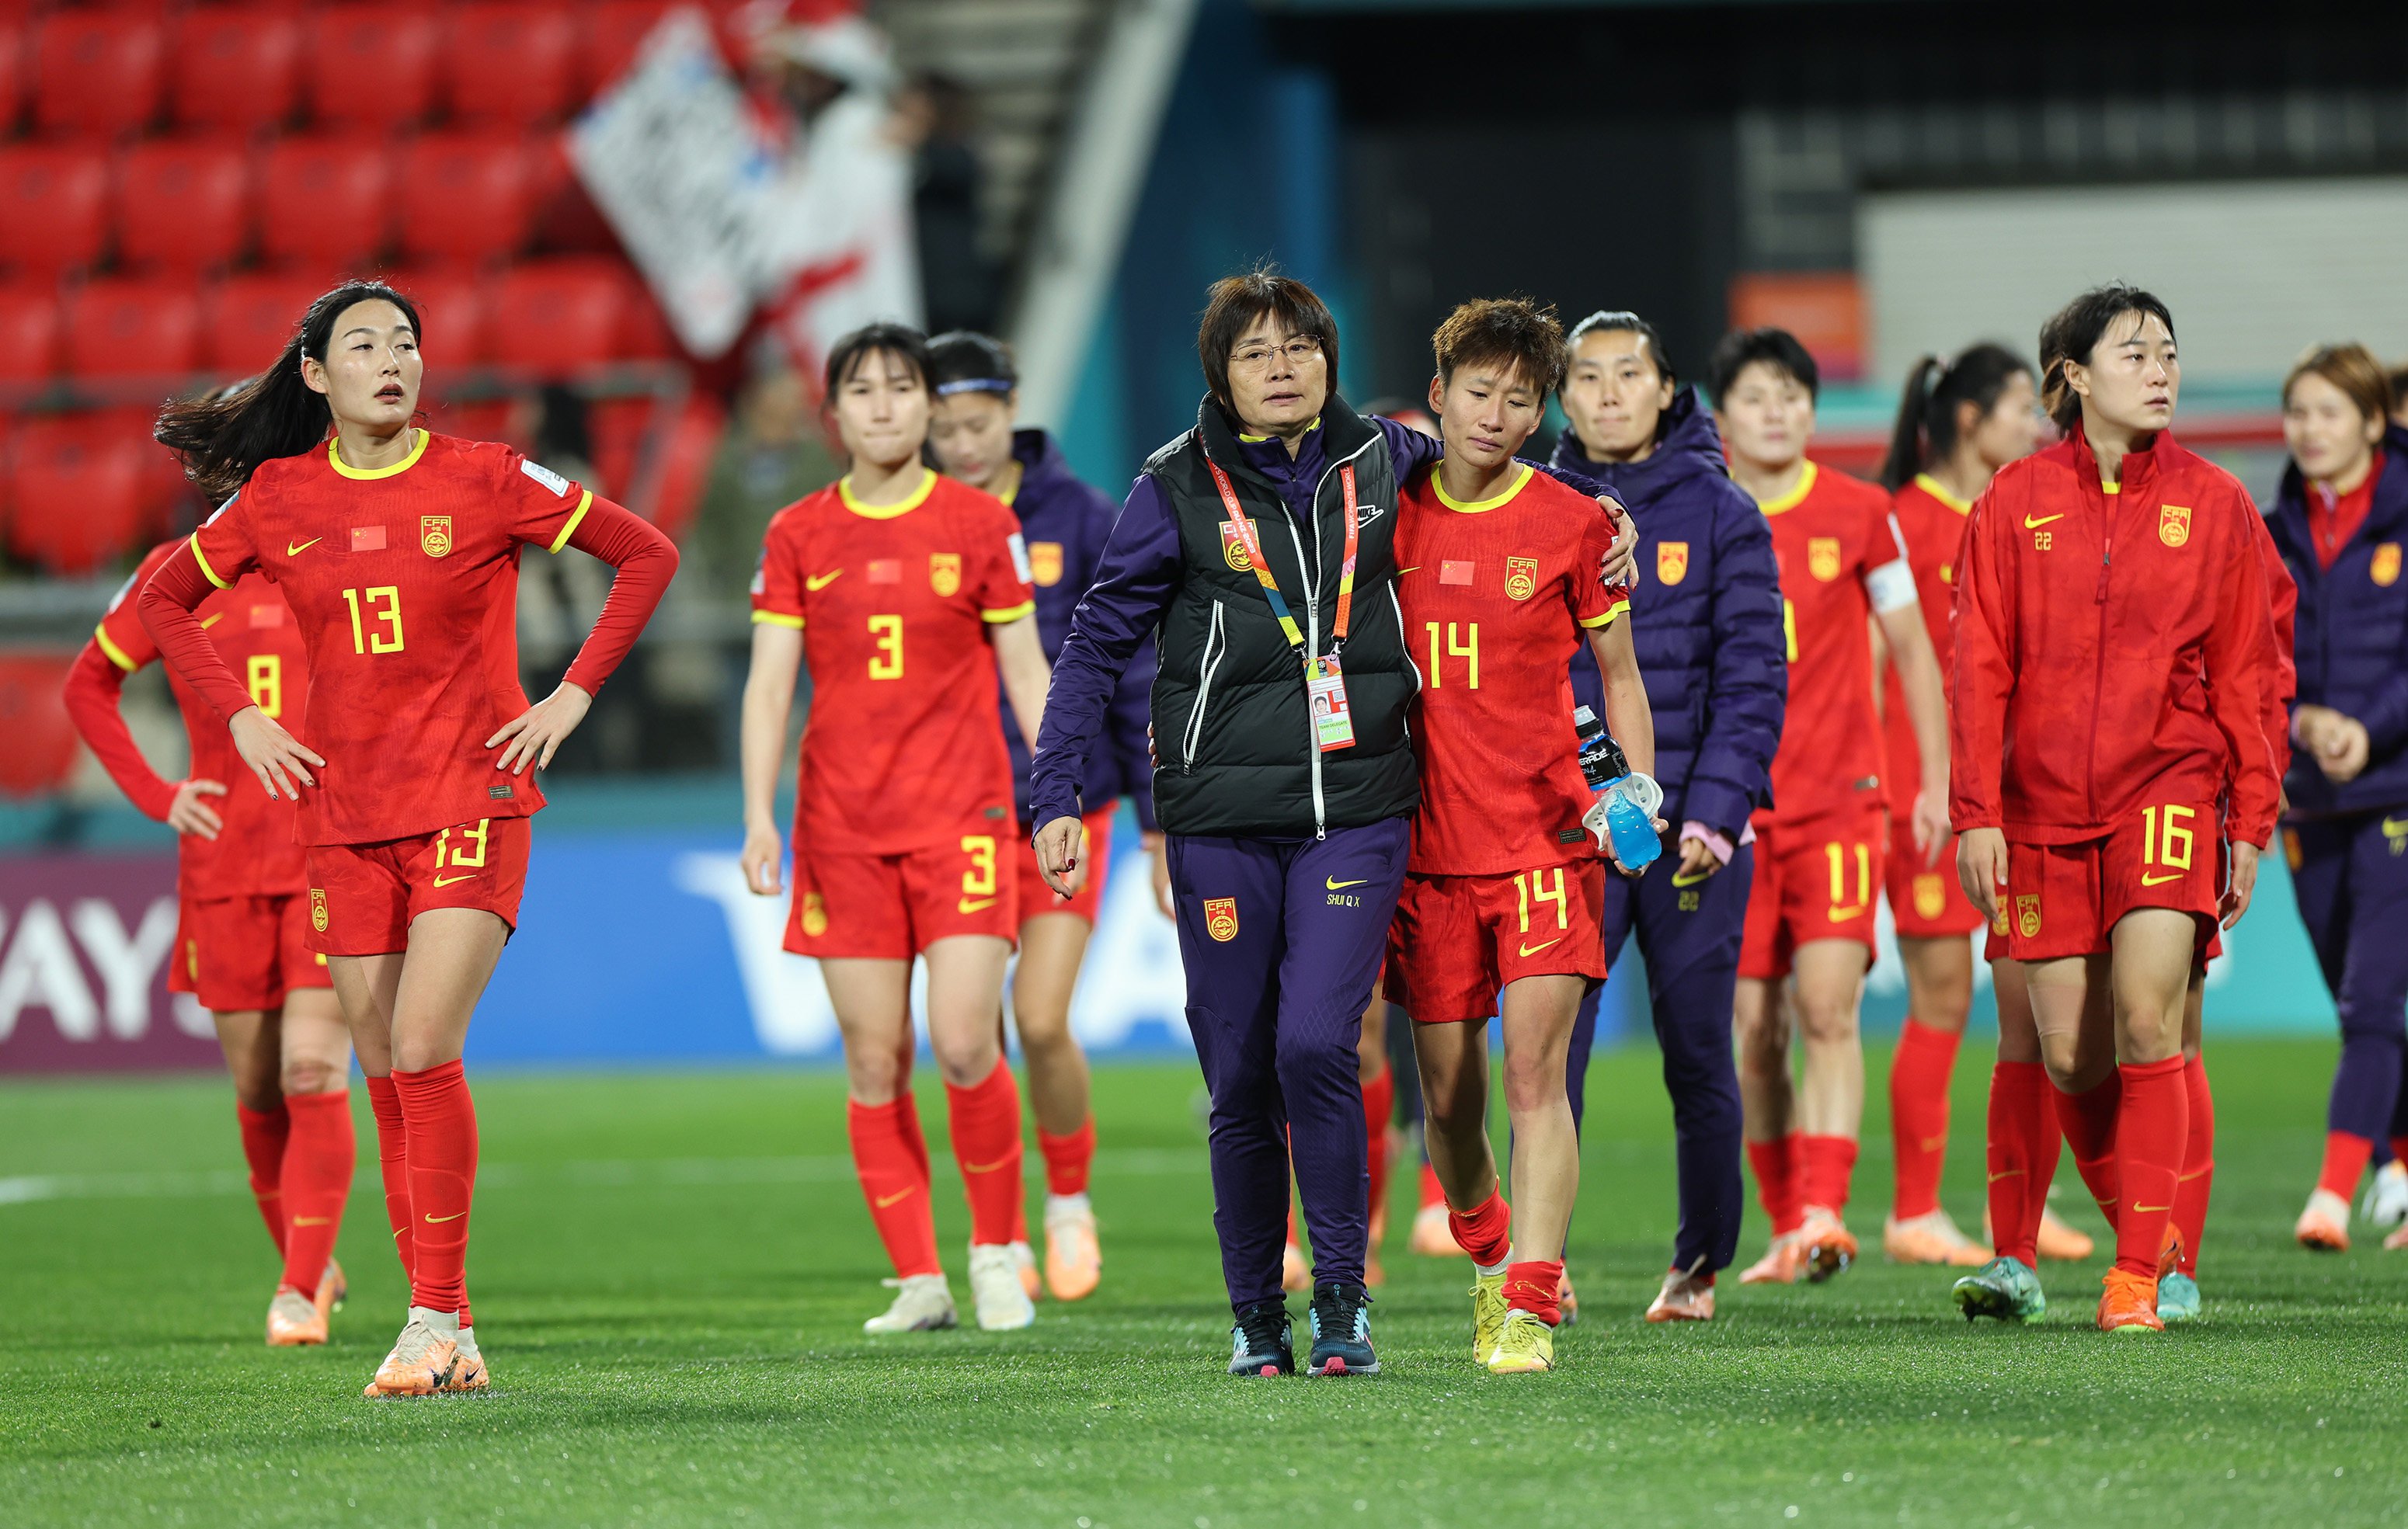 China leave the pitch after a 6-1 loss to England which knocked them out of the Women’s World Cup. Photo: Xinhua